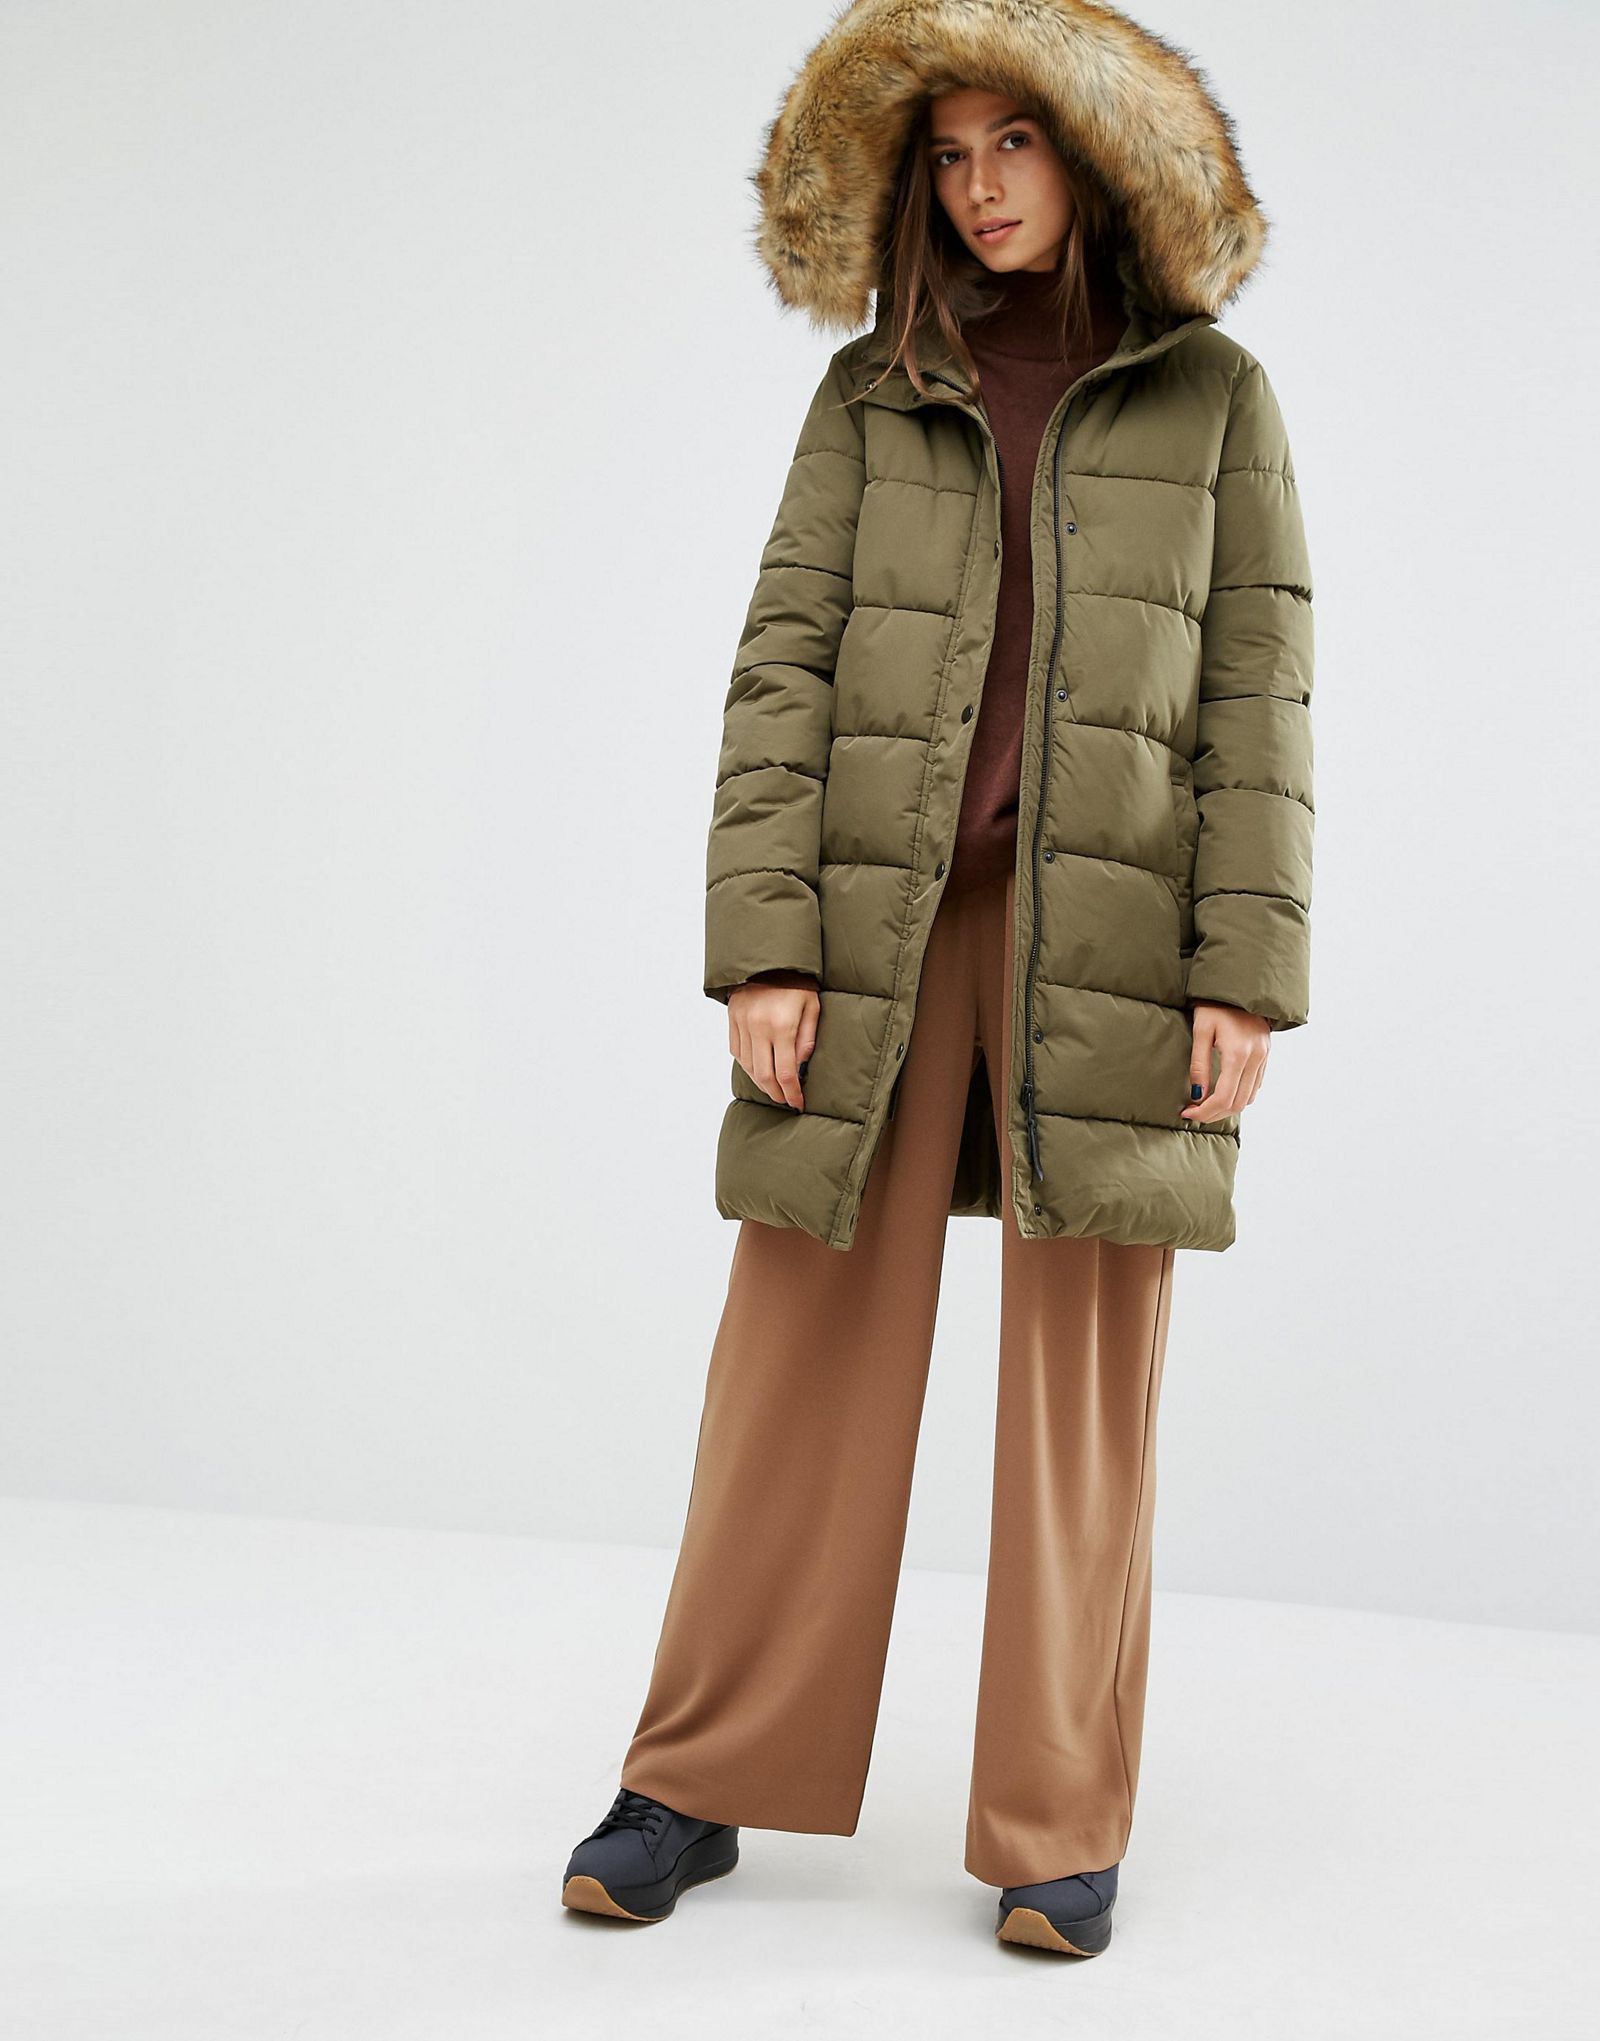 Parka London Thelma Long Padded jacket with Faux Fur Lined Hood